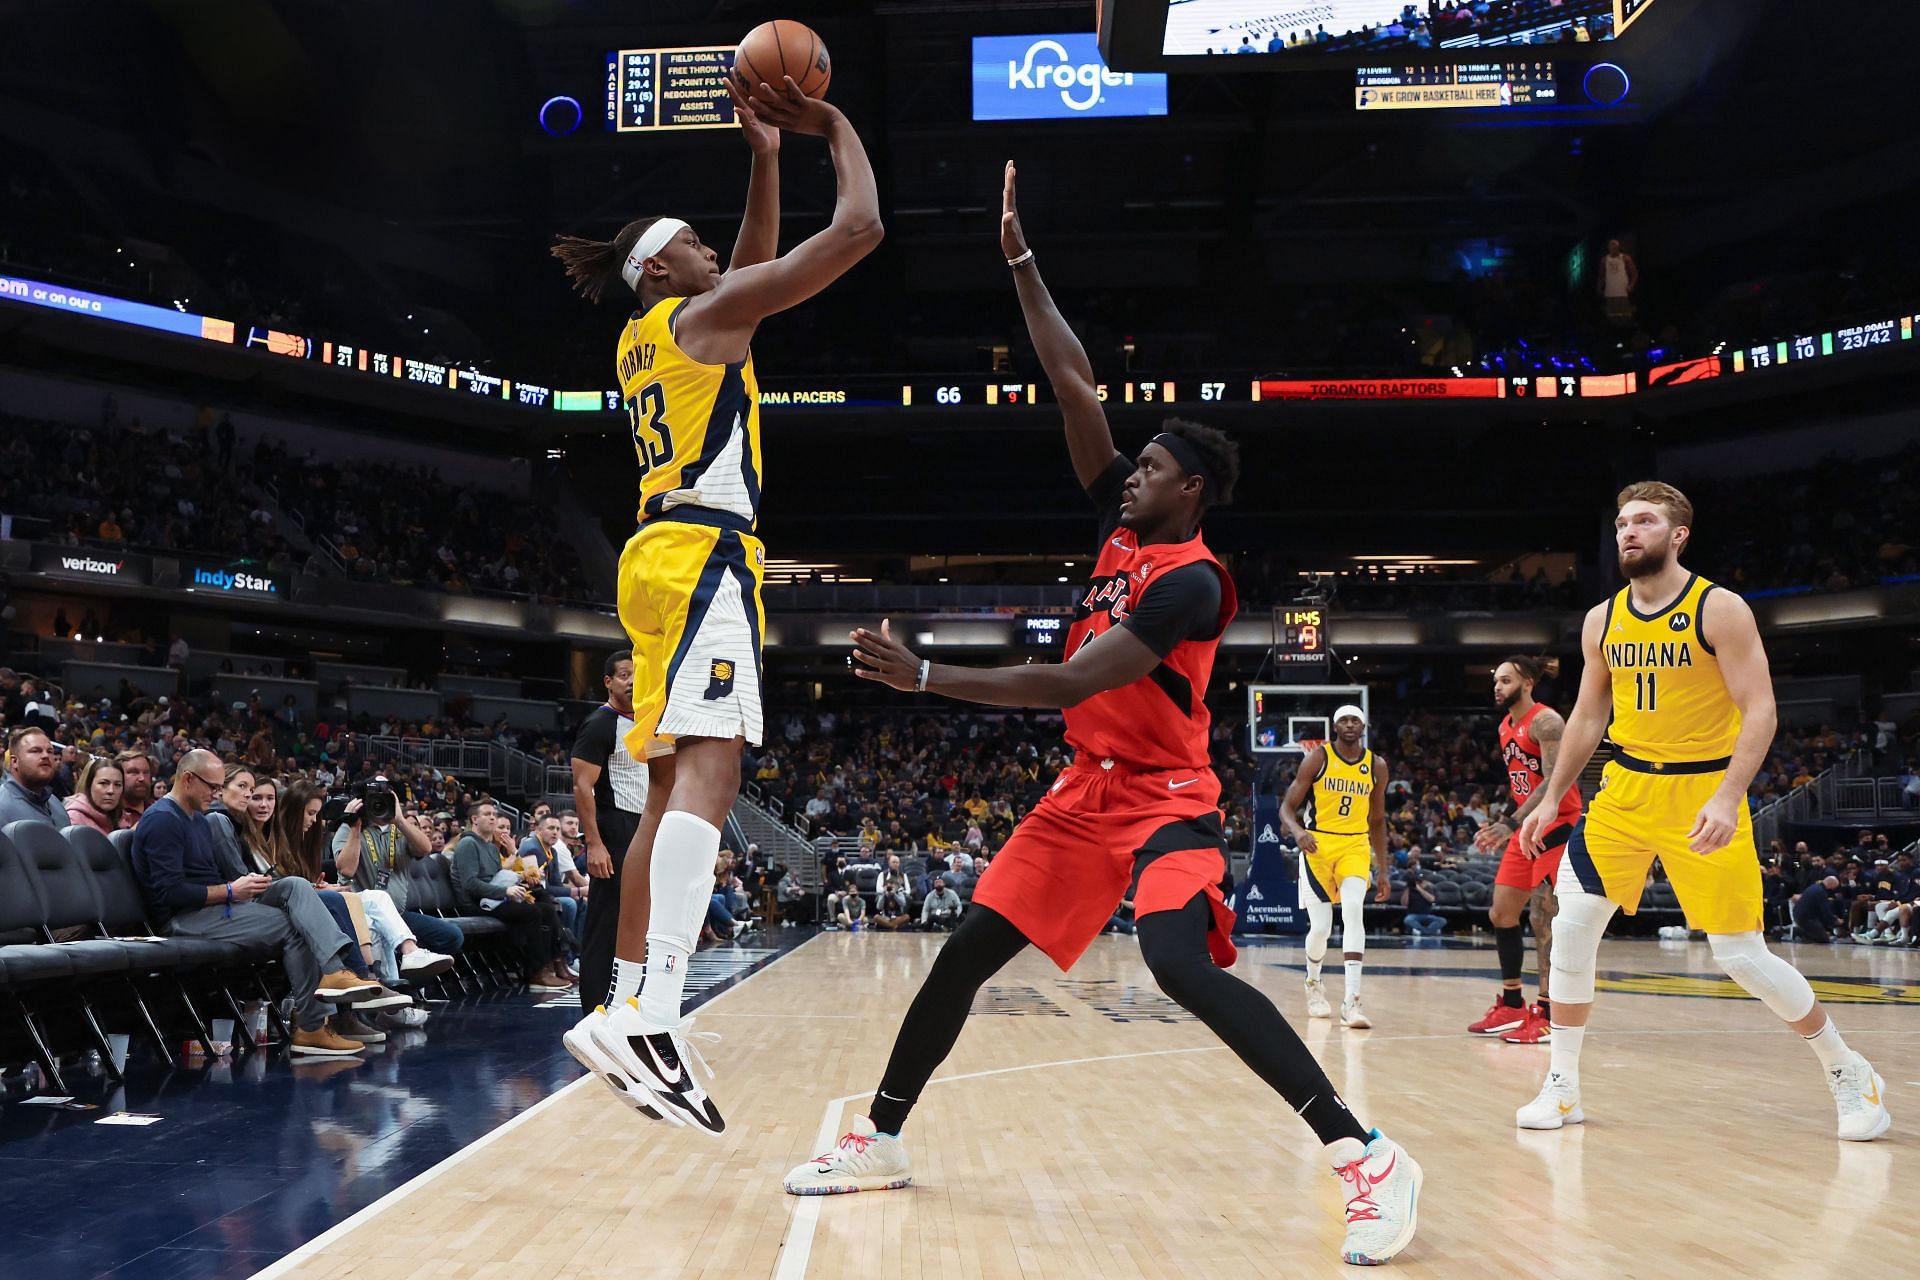 Myles Turner of the Pacers attempts a shot while being guarded by Pascal Siakam